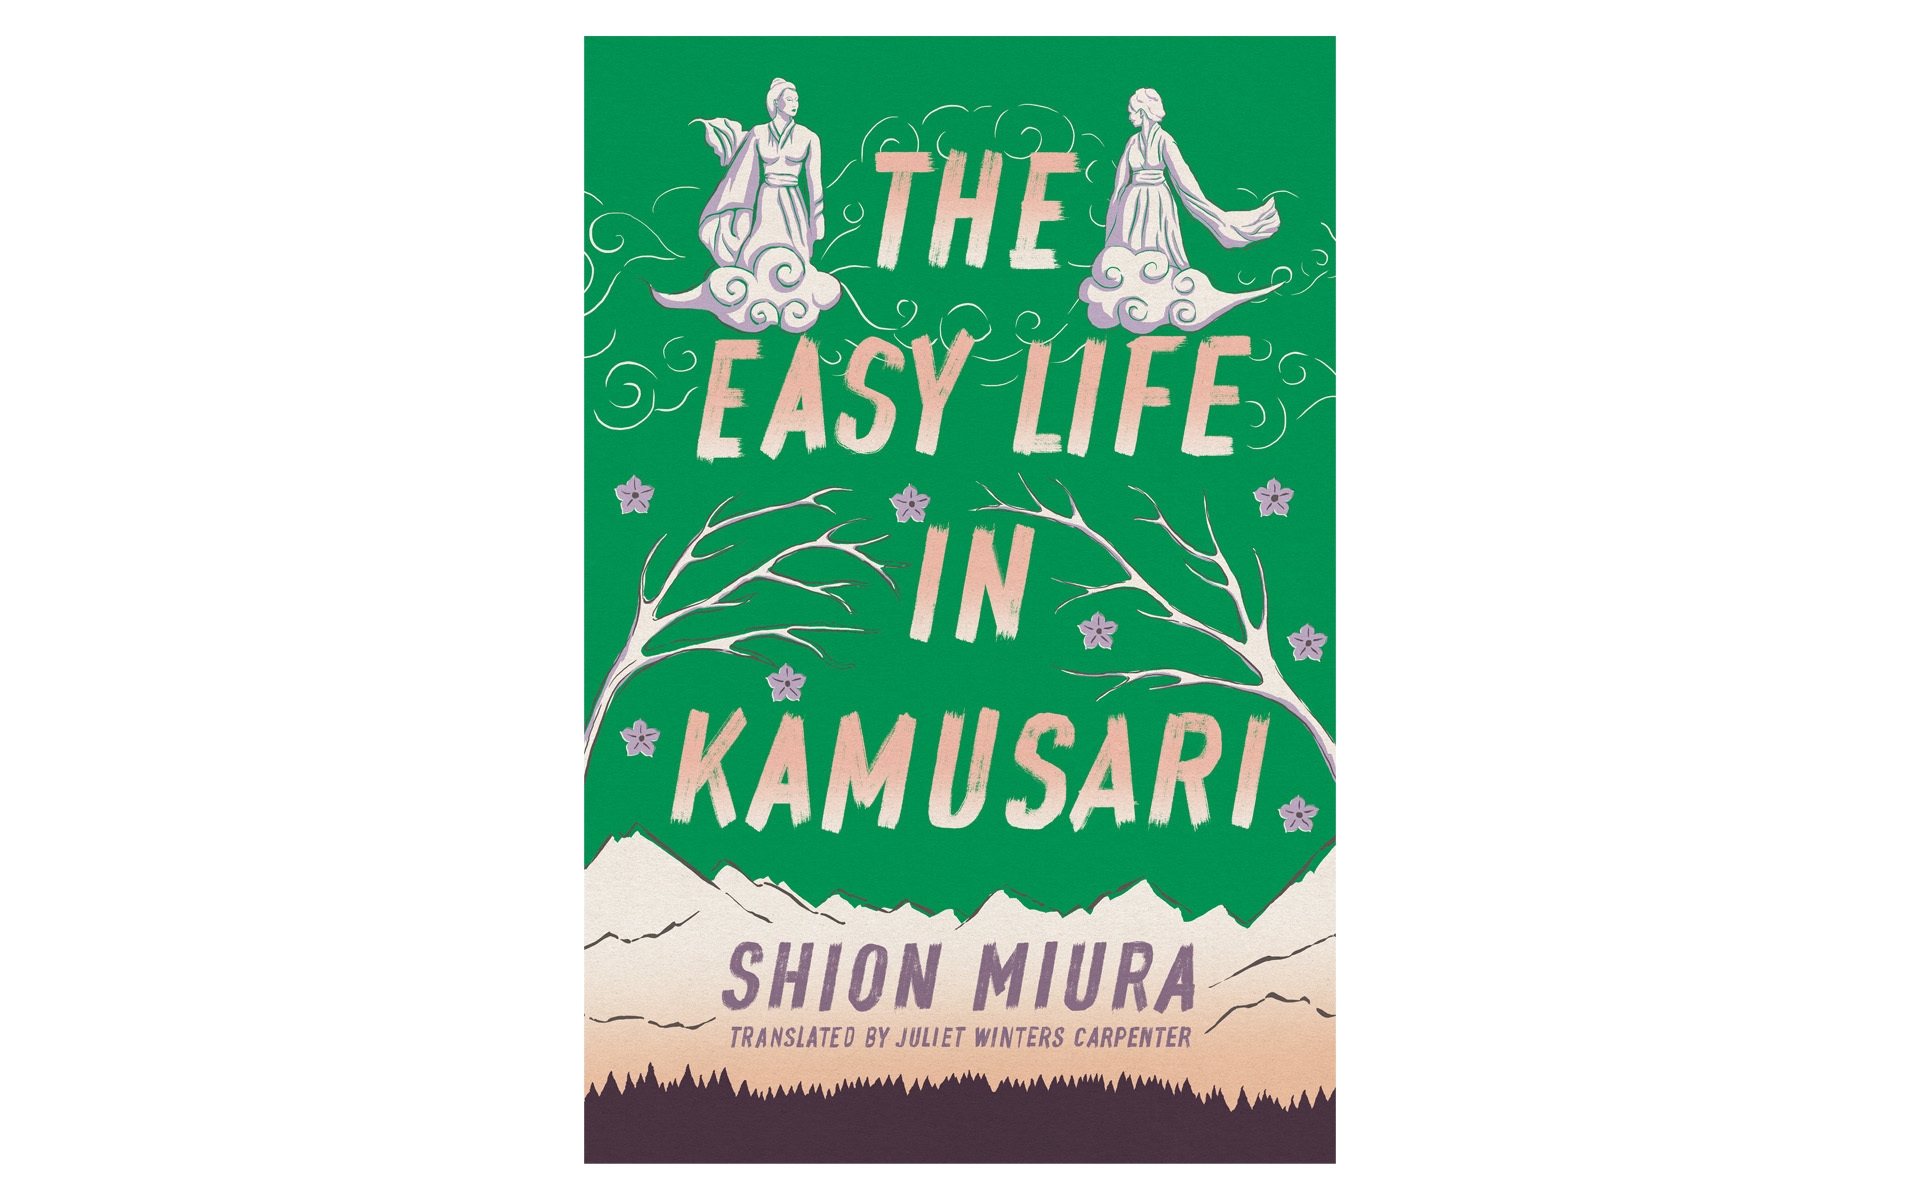 Cover art for the book "The easy life in kamusari"